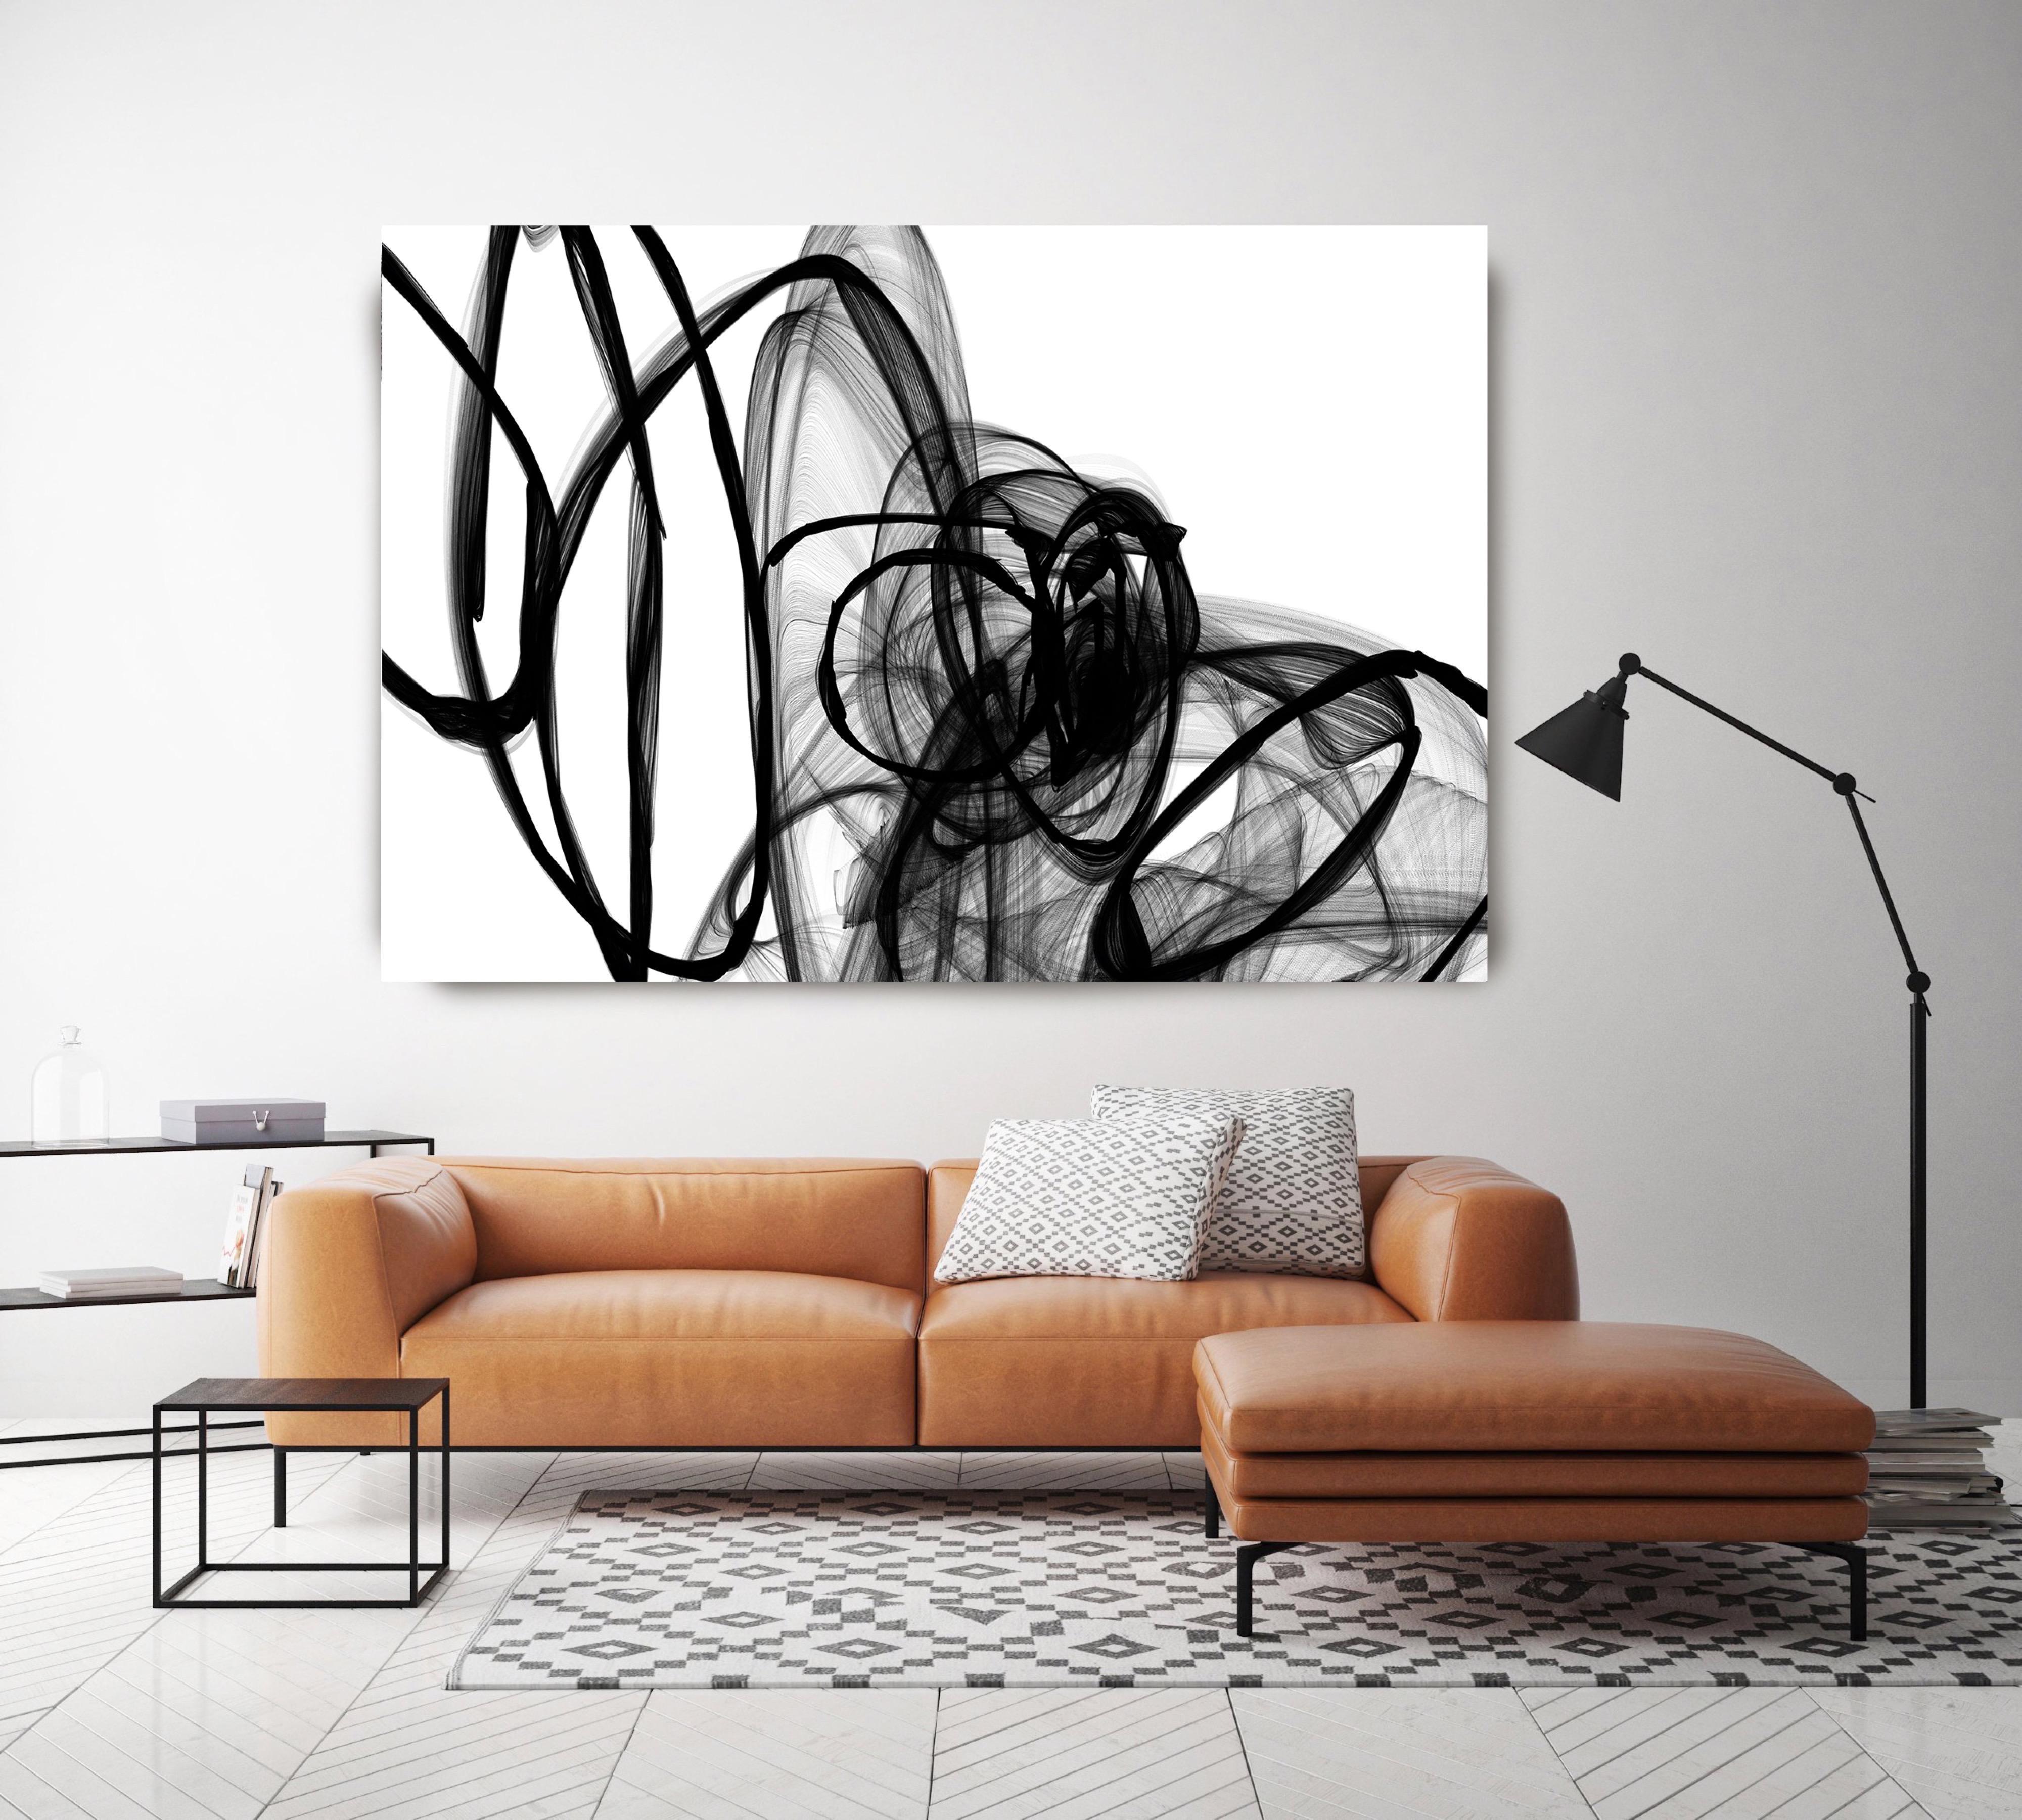 Minimalist Abstract in Black and White, Inside Out 60 x 40" - Mixed Media Art by Irena Orlov